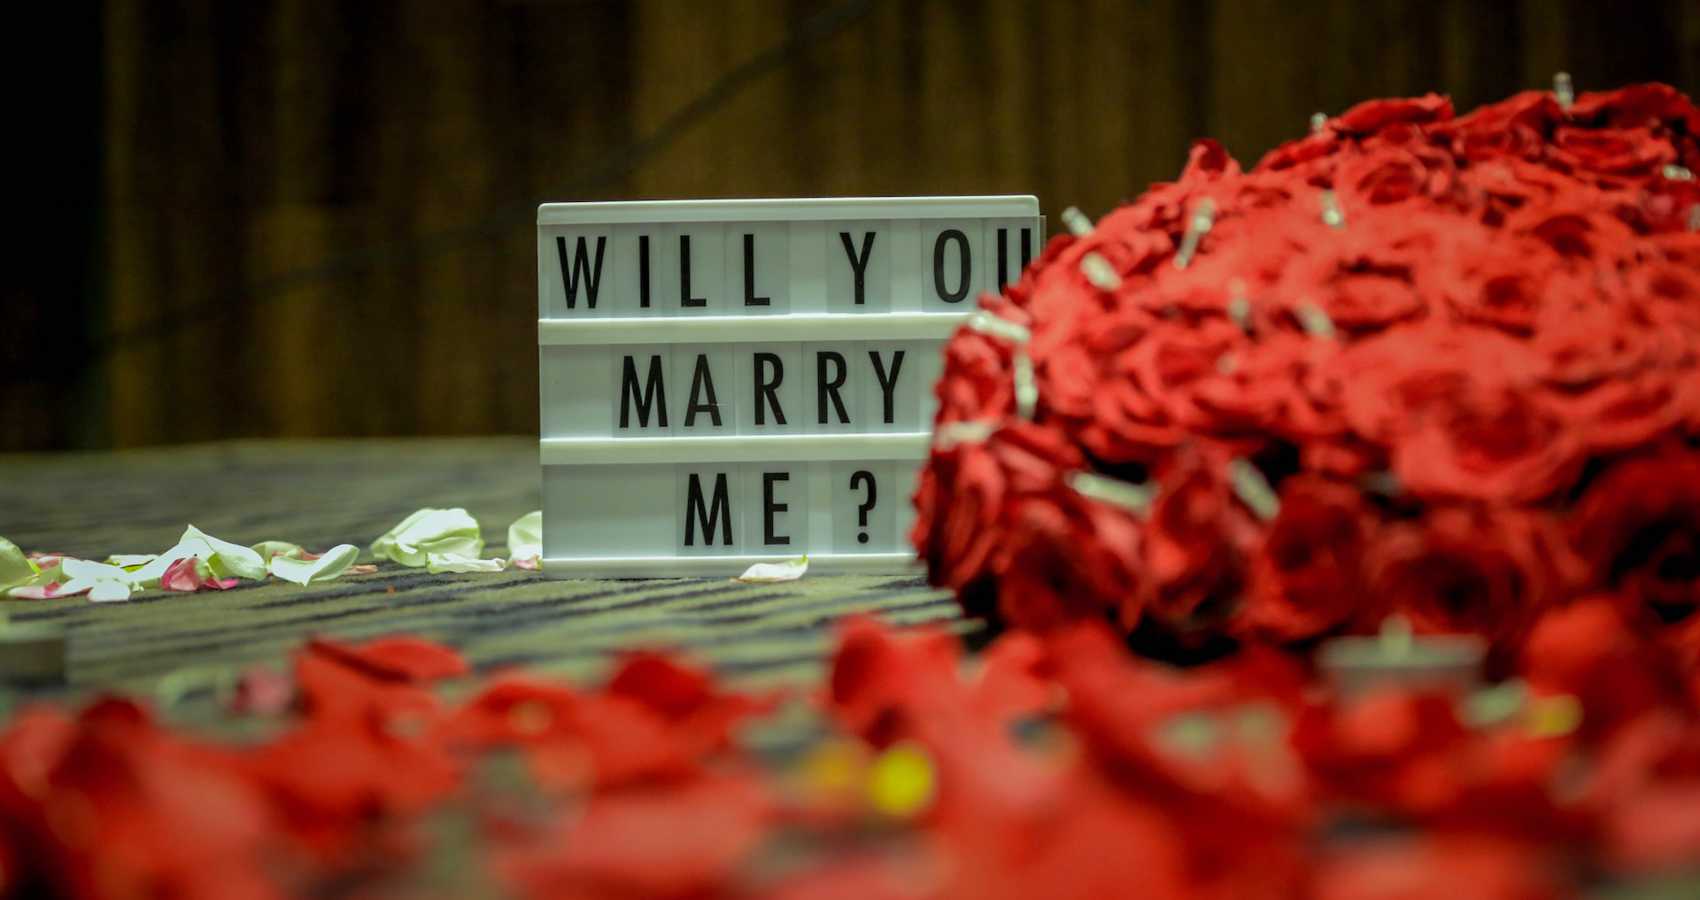 Valentine Proposal, poetry by Sherry Healy at Spillwords.com